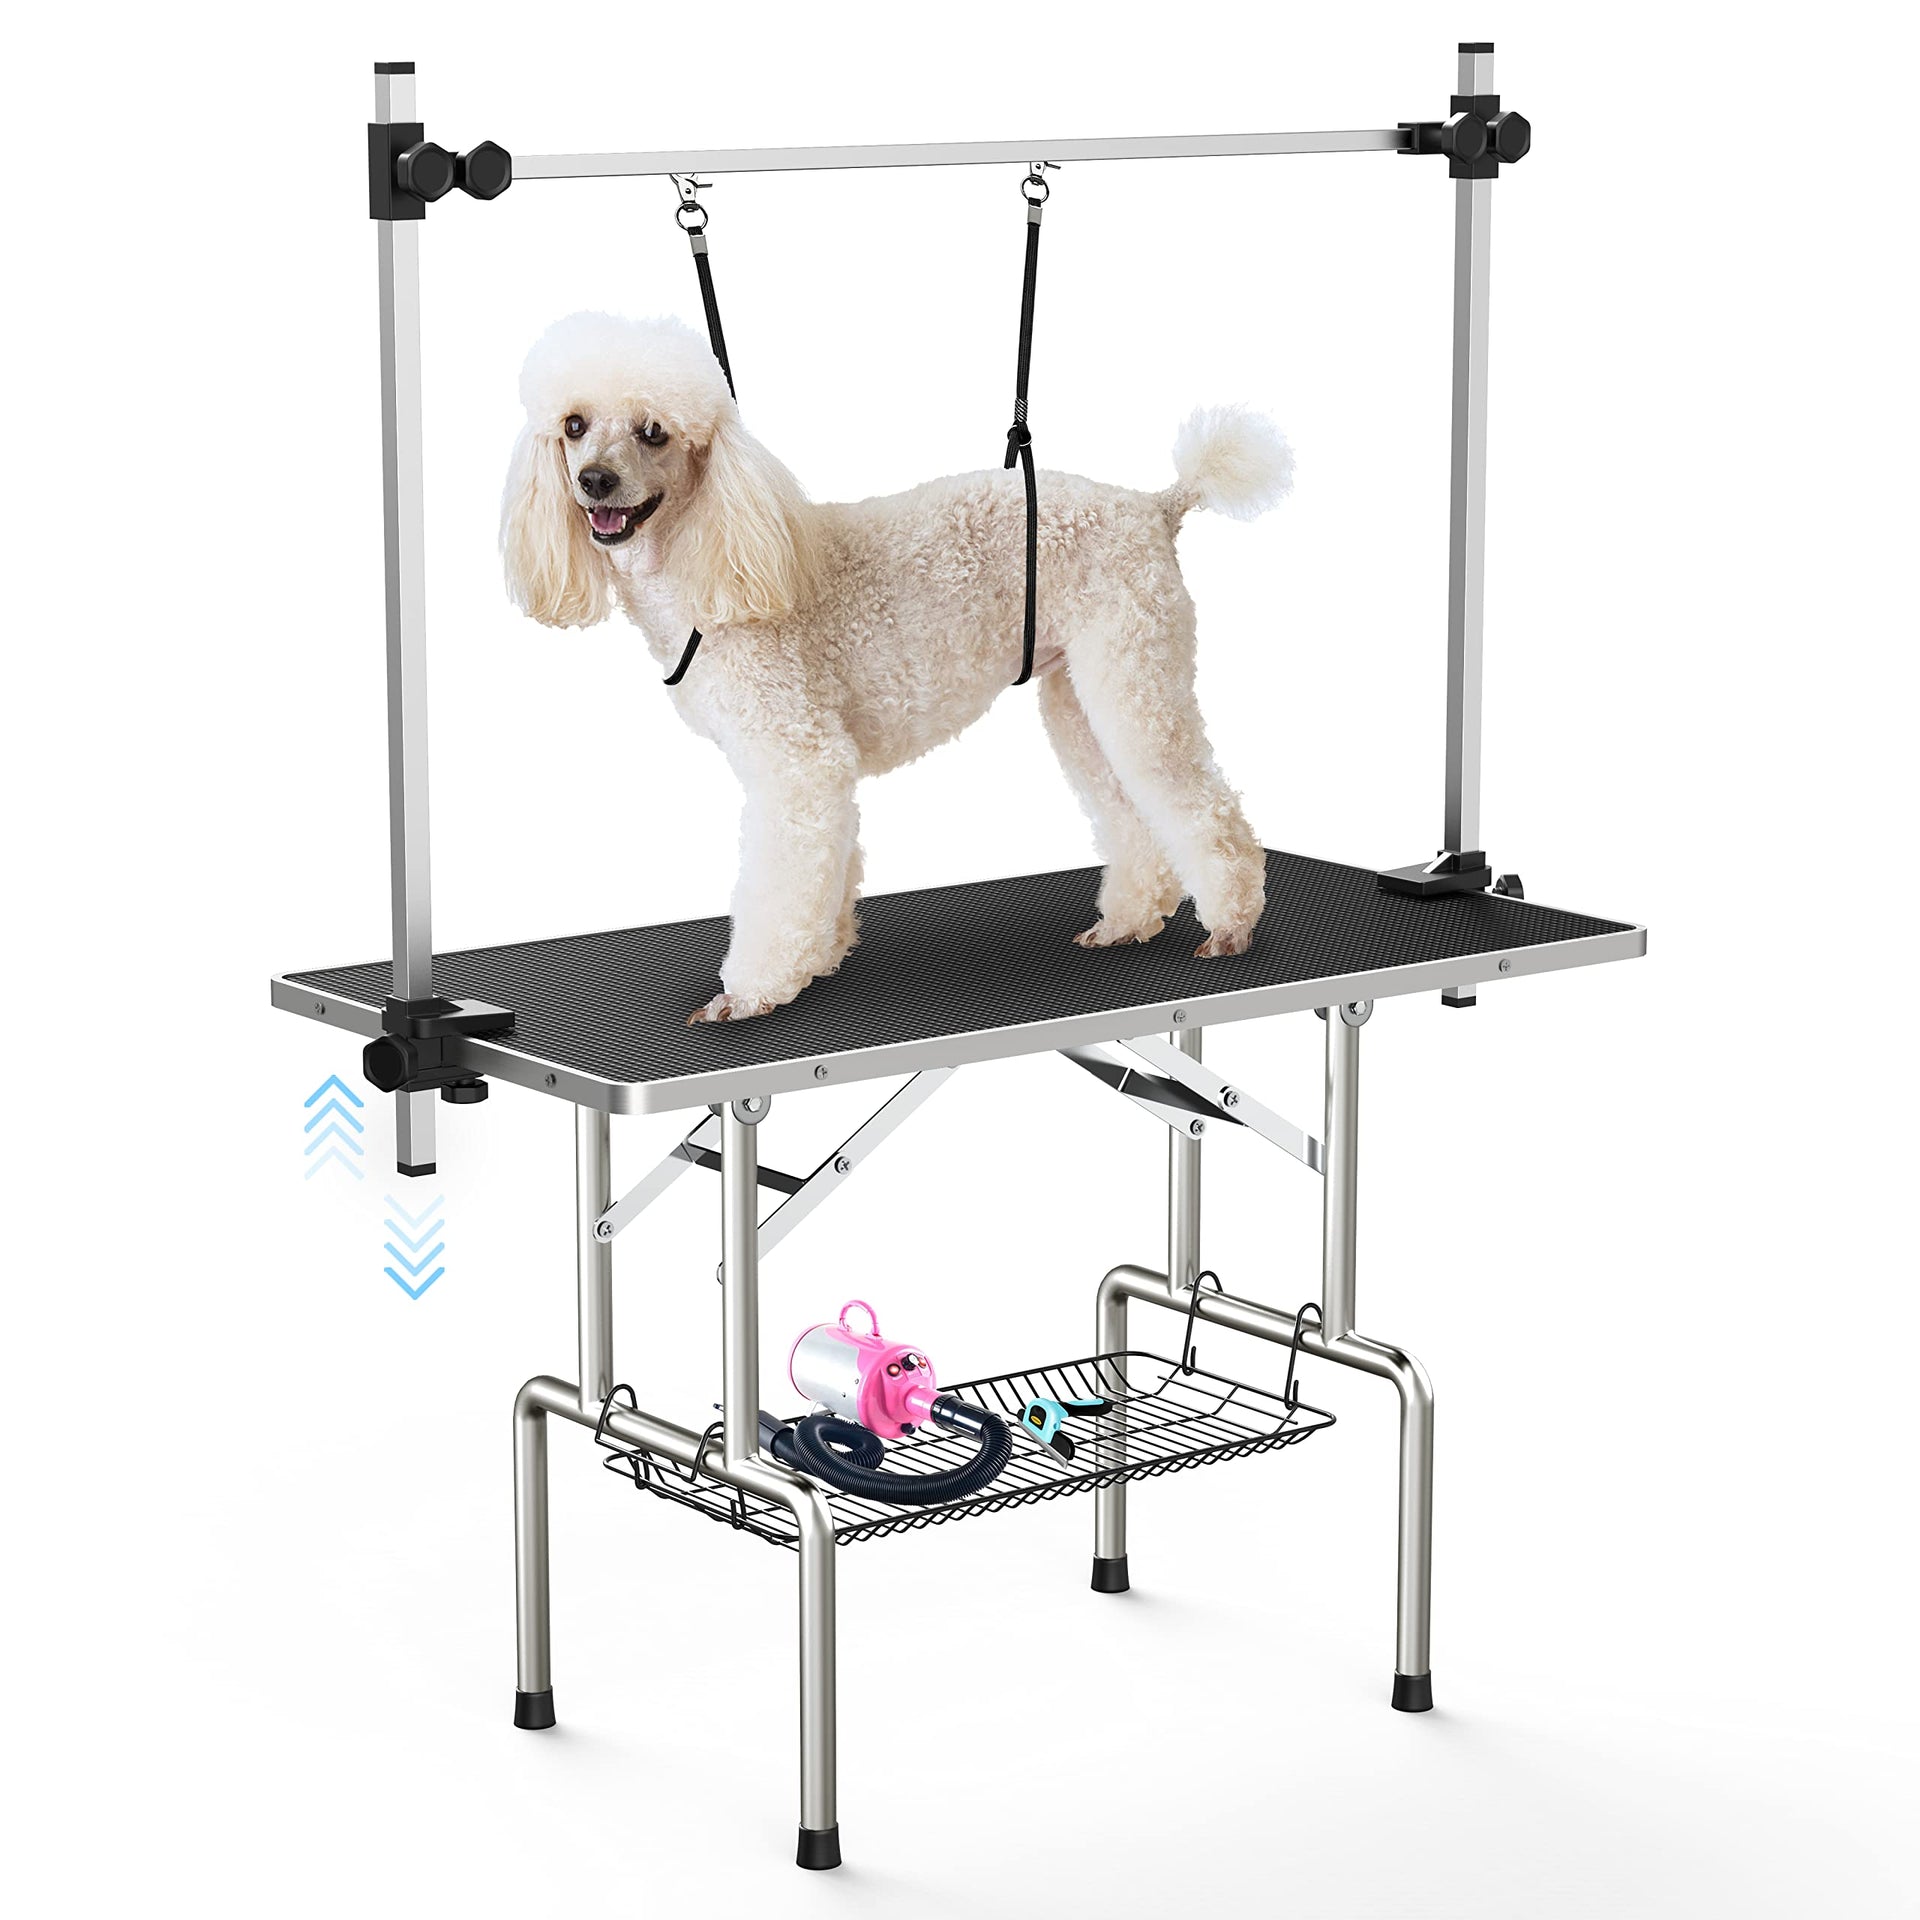 46 Dog/Pet Grooming Table Blue – Unovivy